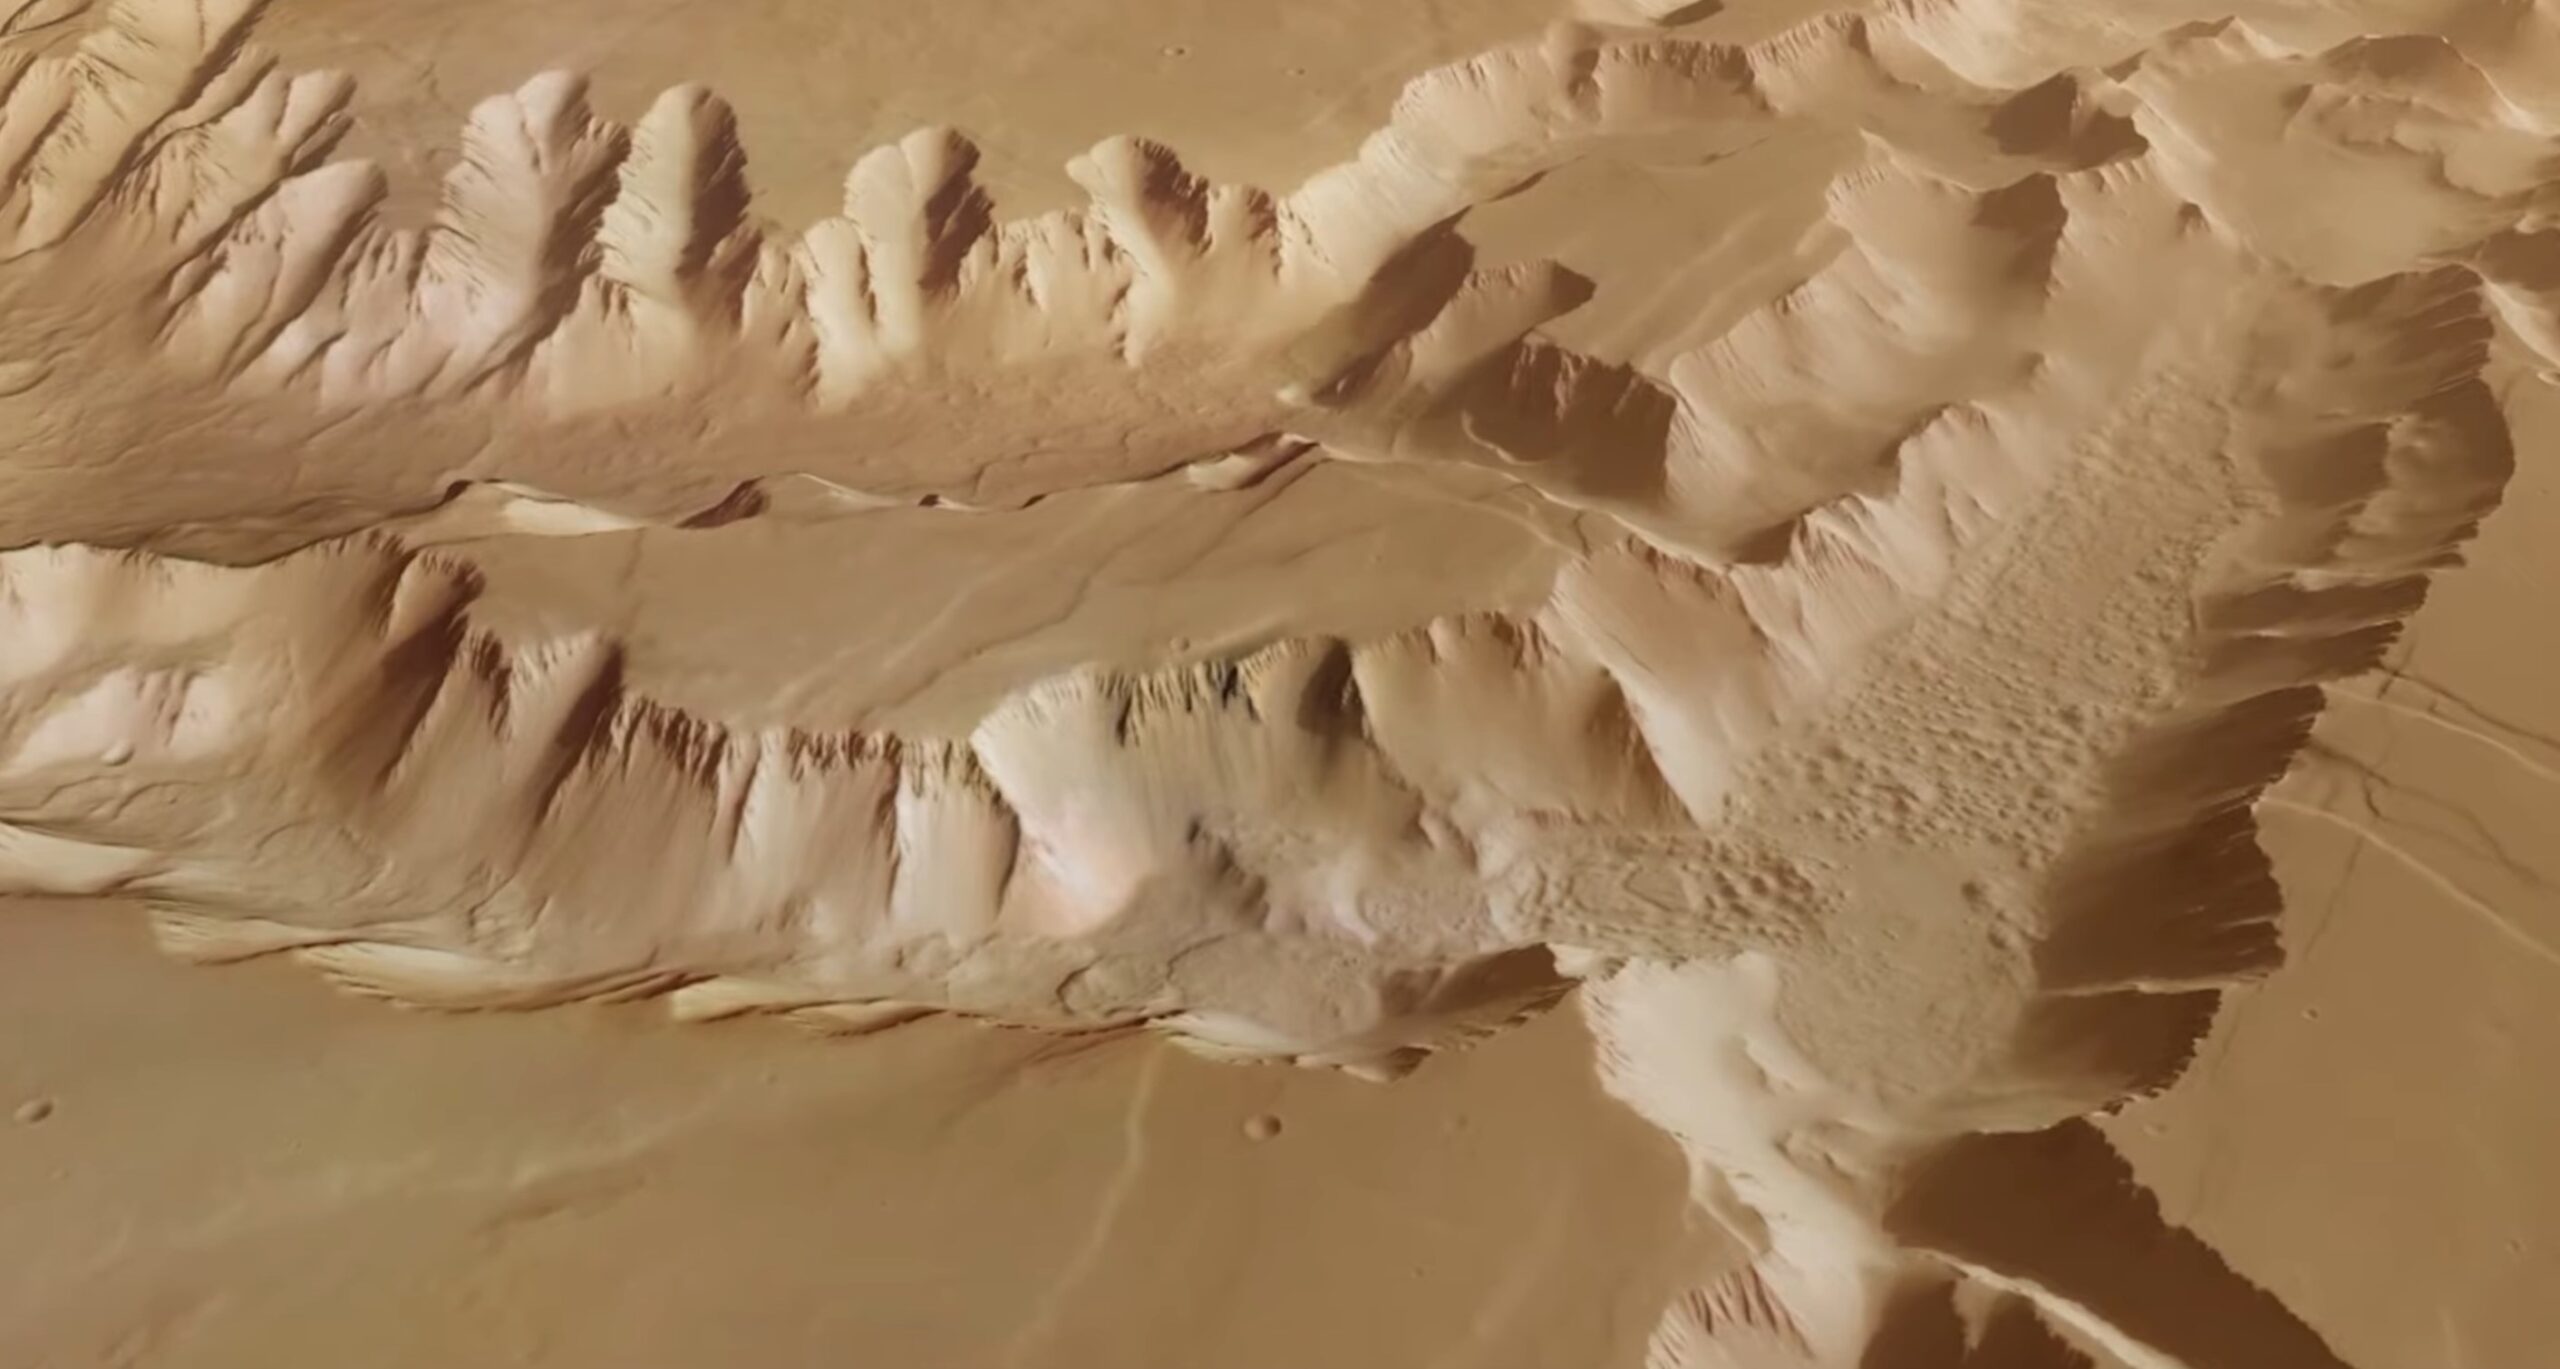 Mars Express investigates wrinkles on the old “face” of Mars: Video